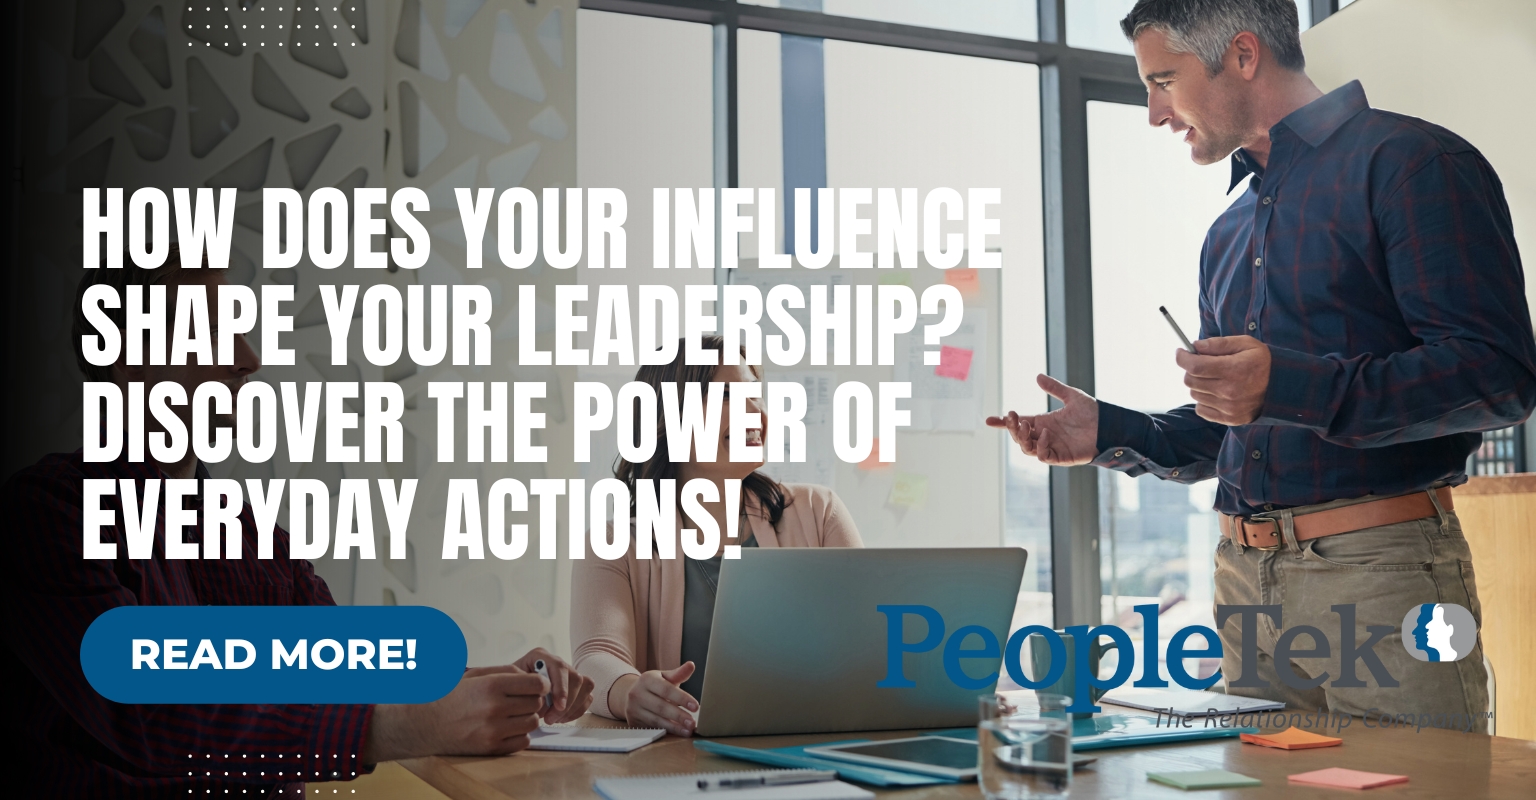 How Does Your Influence Shape Your Leadership? Discover the Power of Everyday Actions!